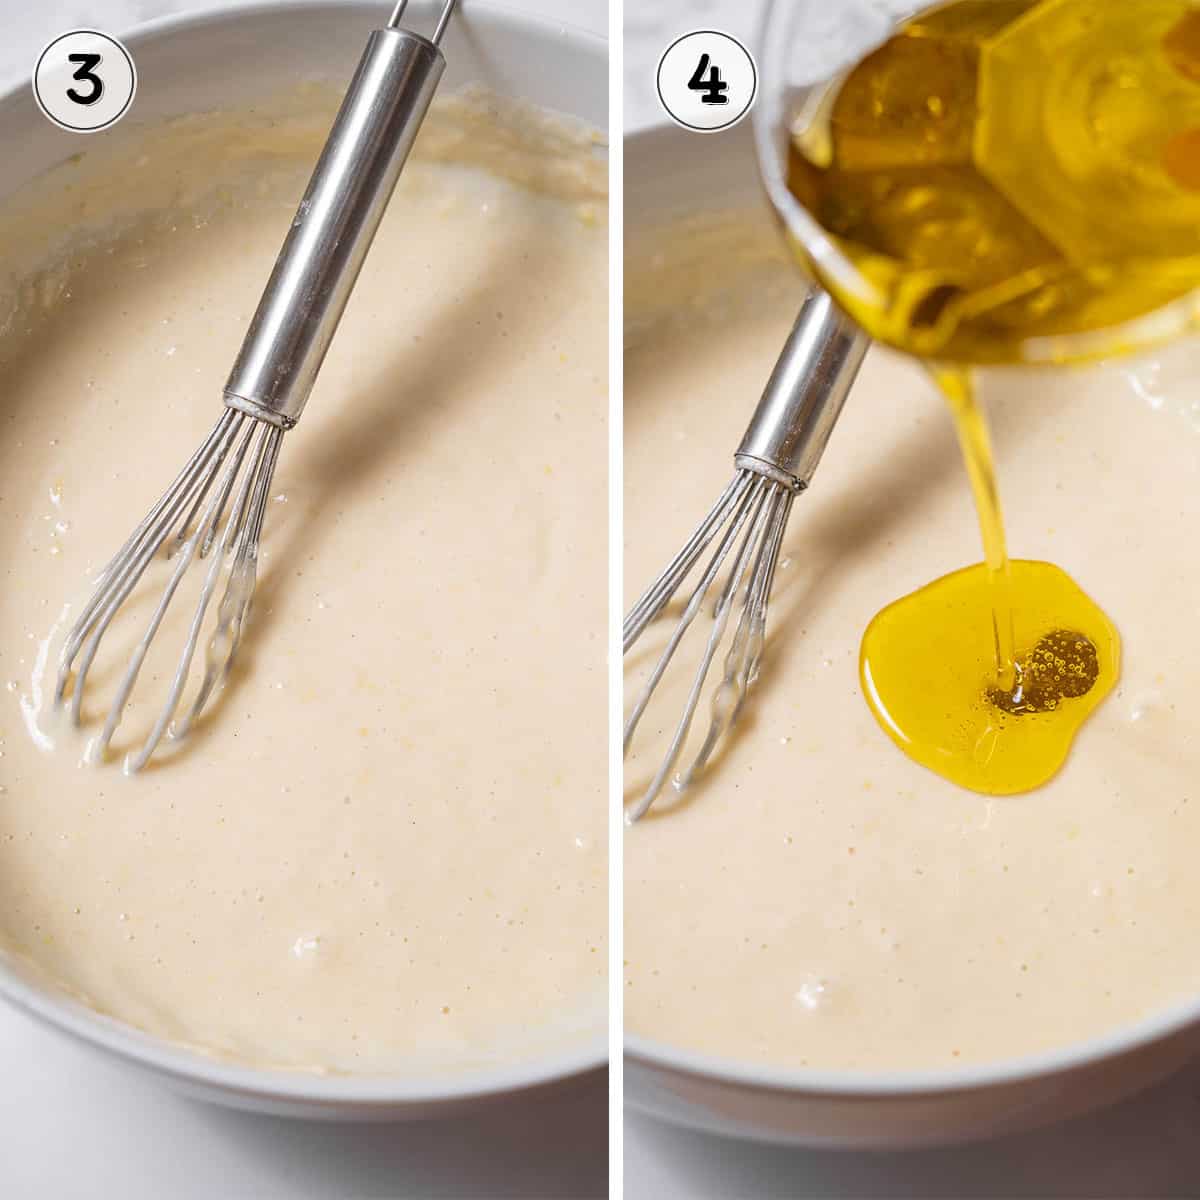 adding the oil to the cake batter.